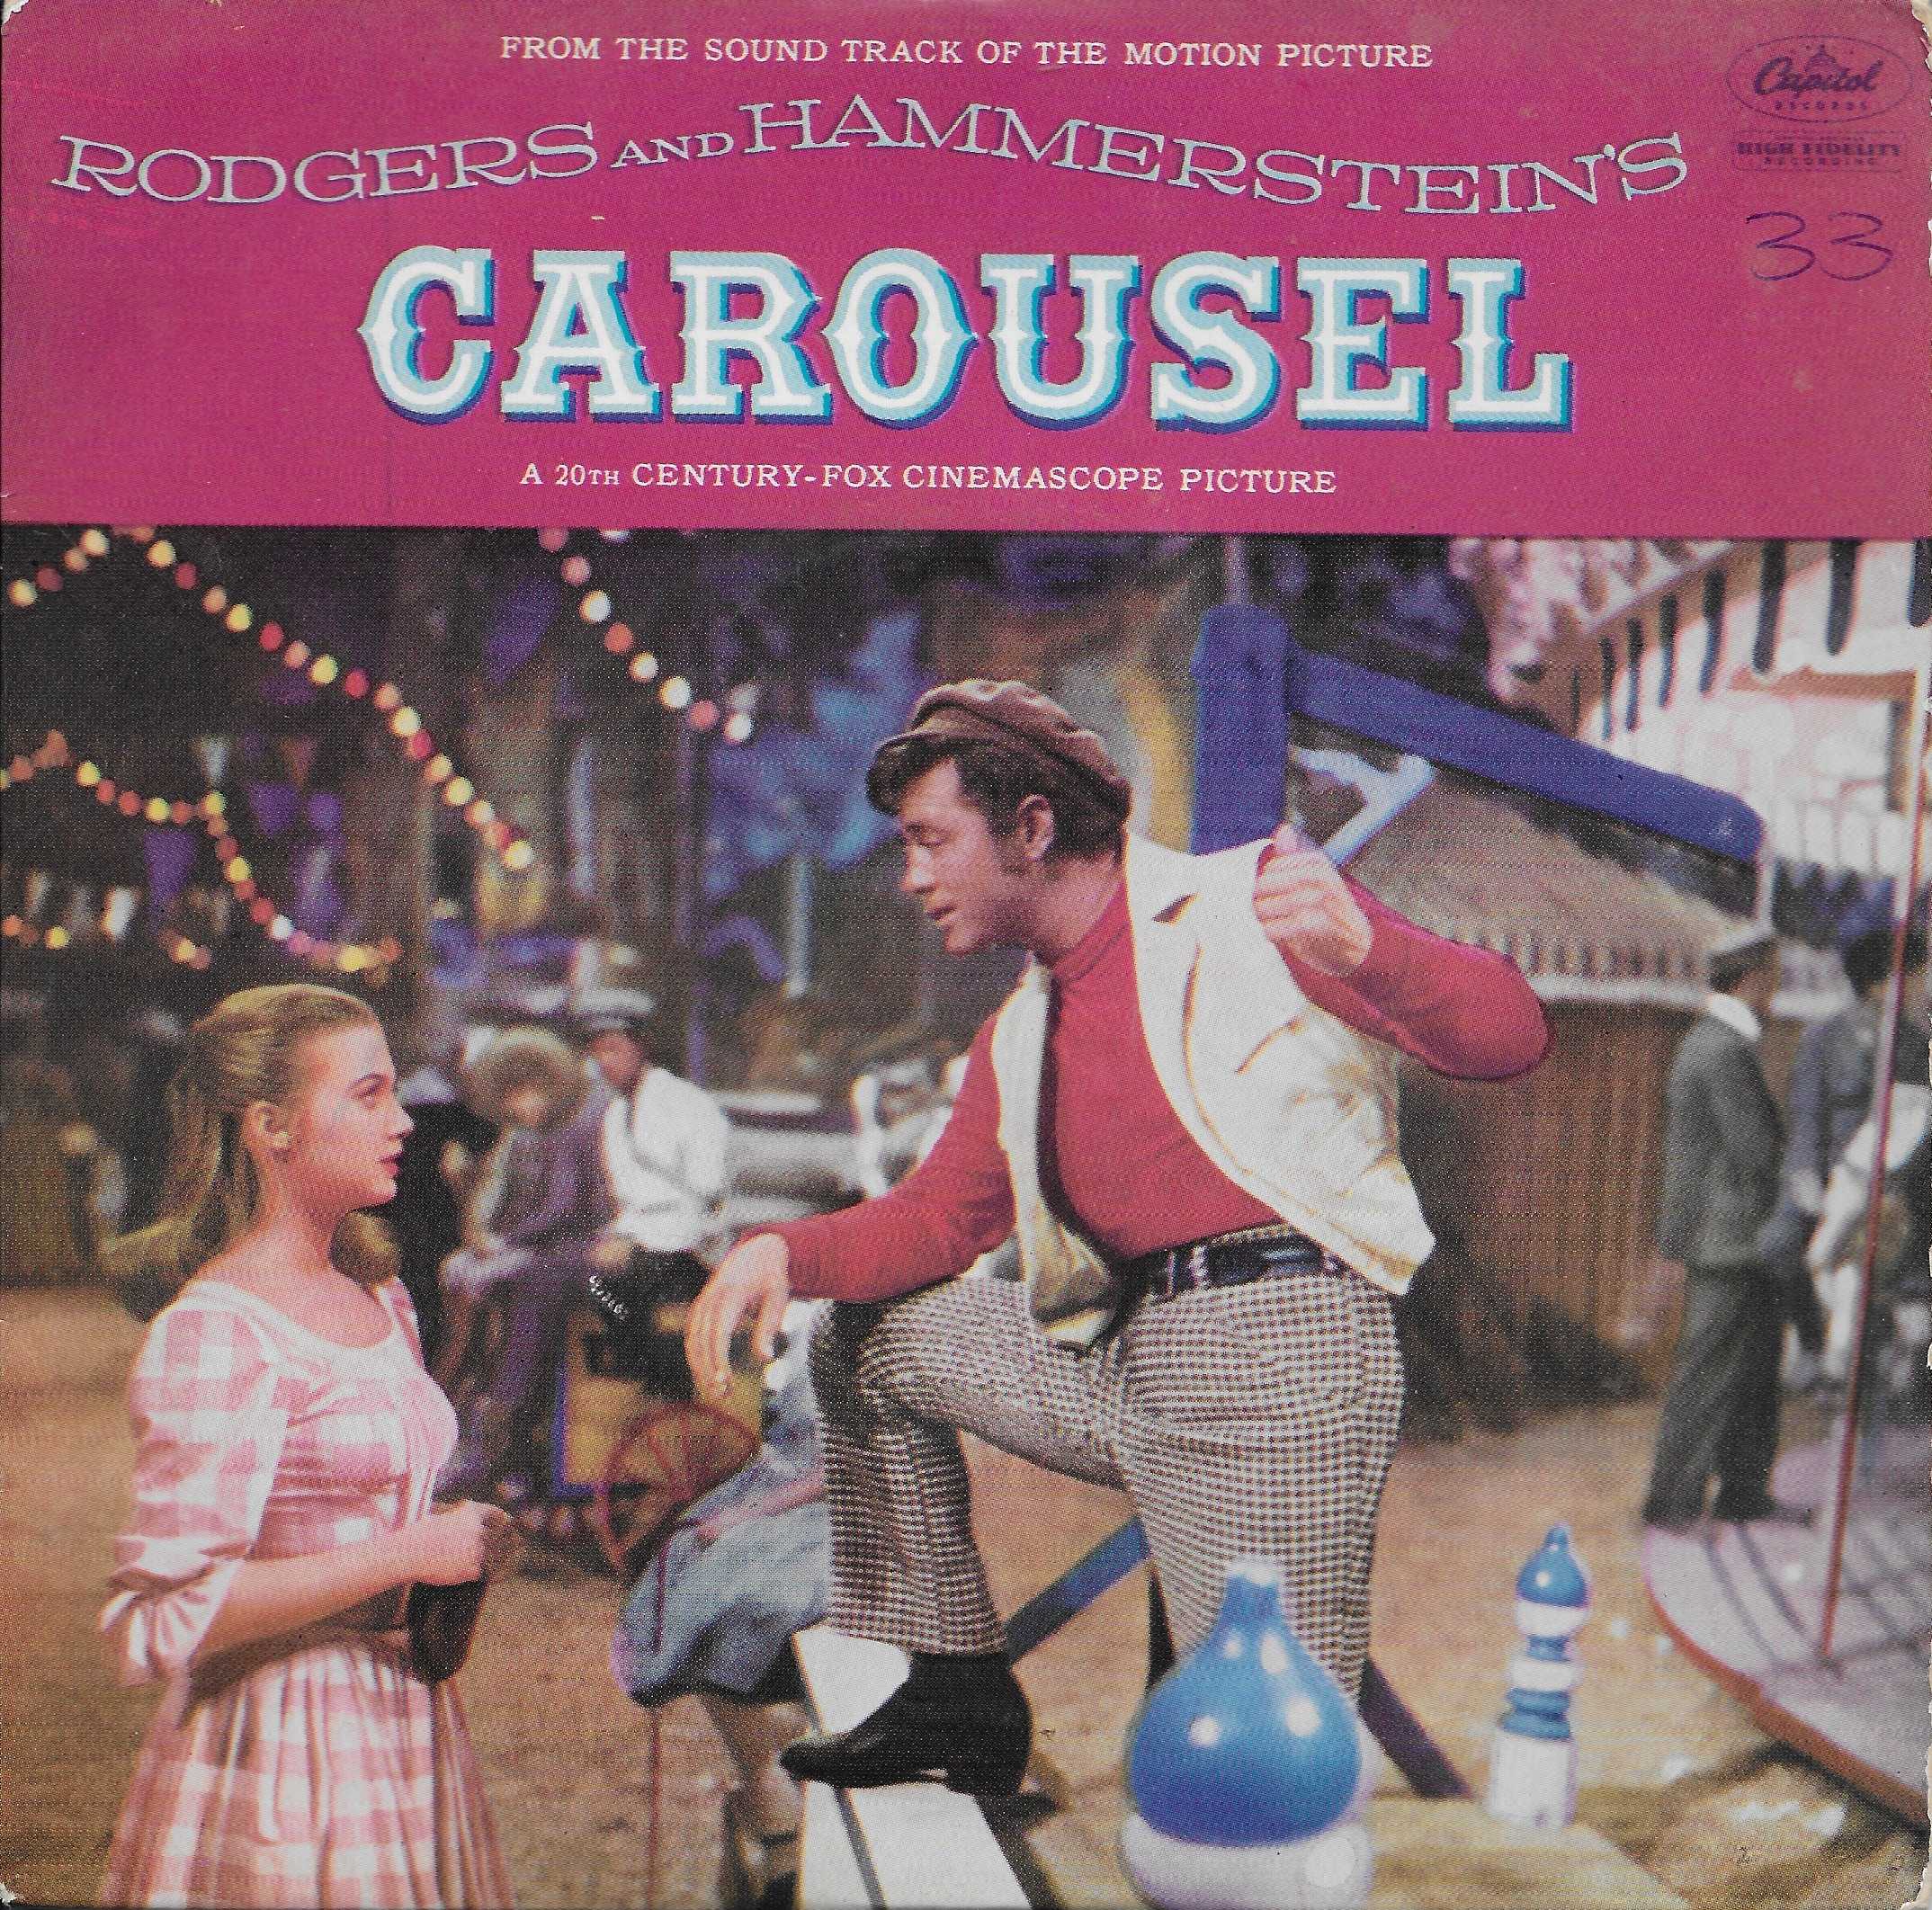 Picture of Carousel 3 by artist Rodgers / Hammerstein II from ITV, Channel 4 and Channel 5 singles library